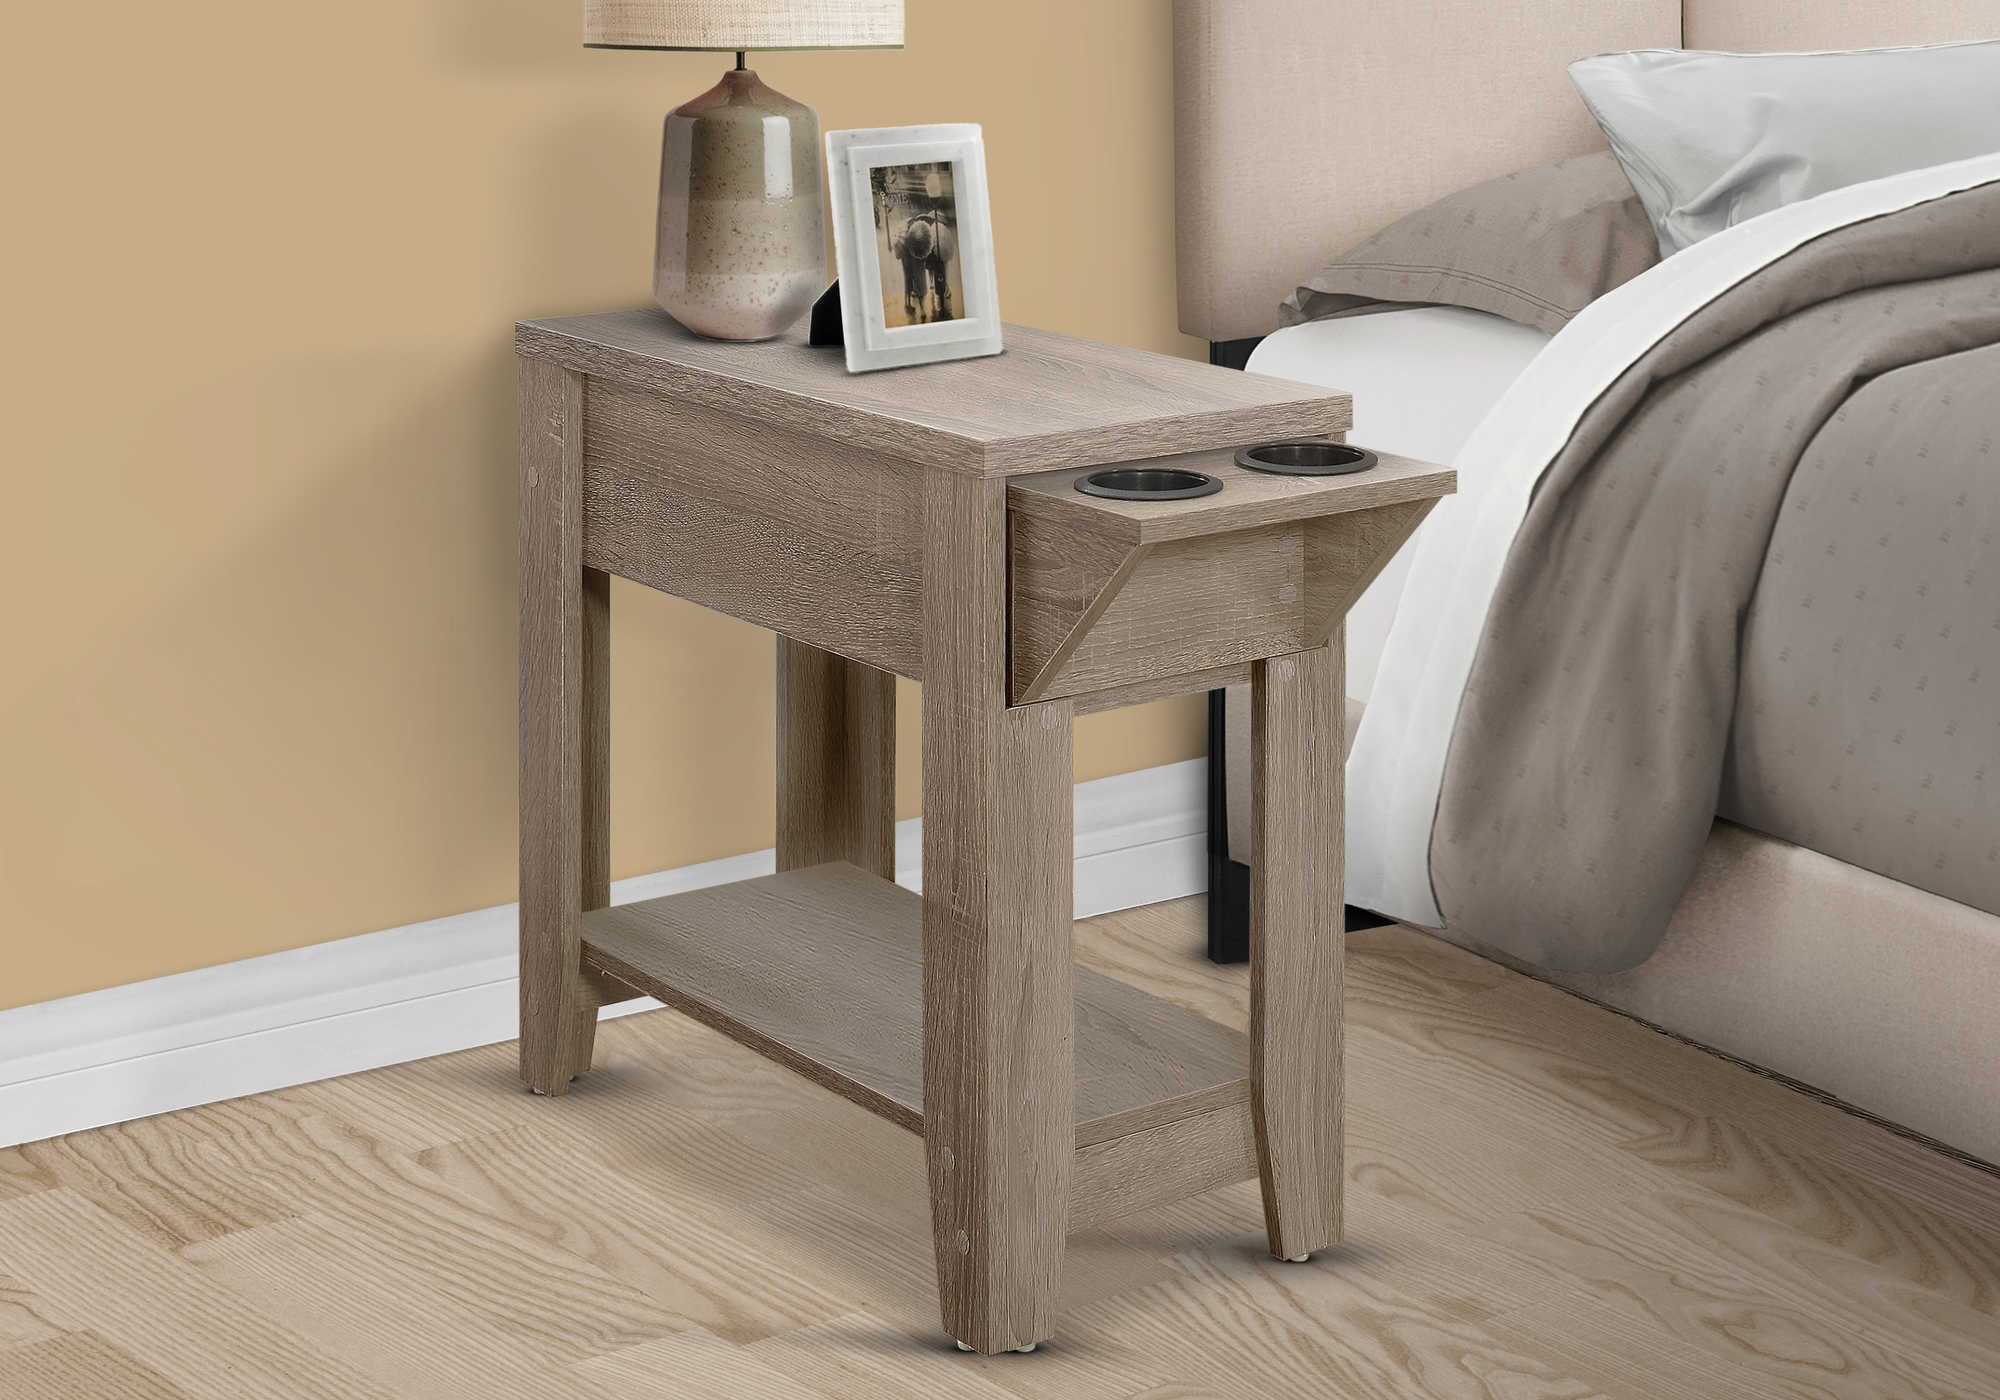 NIGHTSTAND - 23"H / DARK TAUPE WITH A GLASS HOLDER